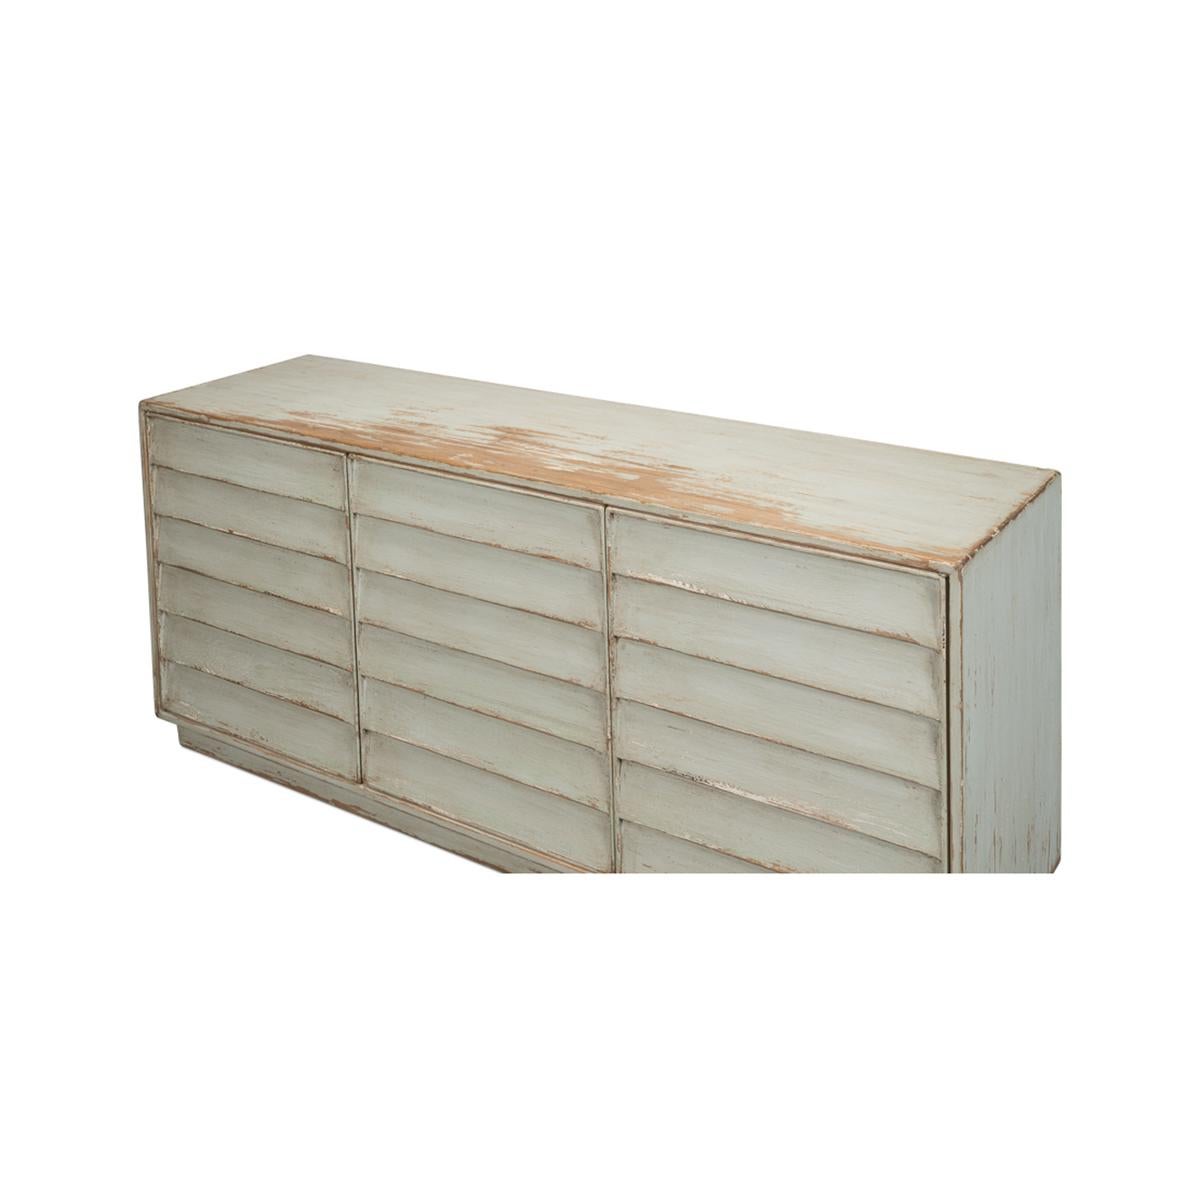 Rustic Modern Louvered Sideboard - Sage In New Condition For Sale In Westwood, NJ